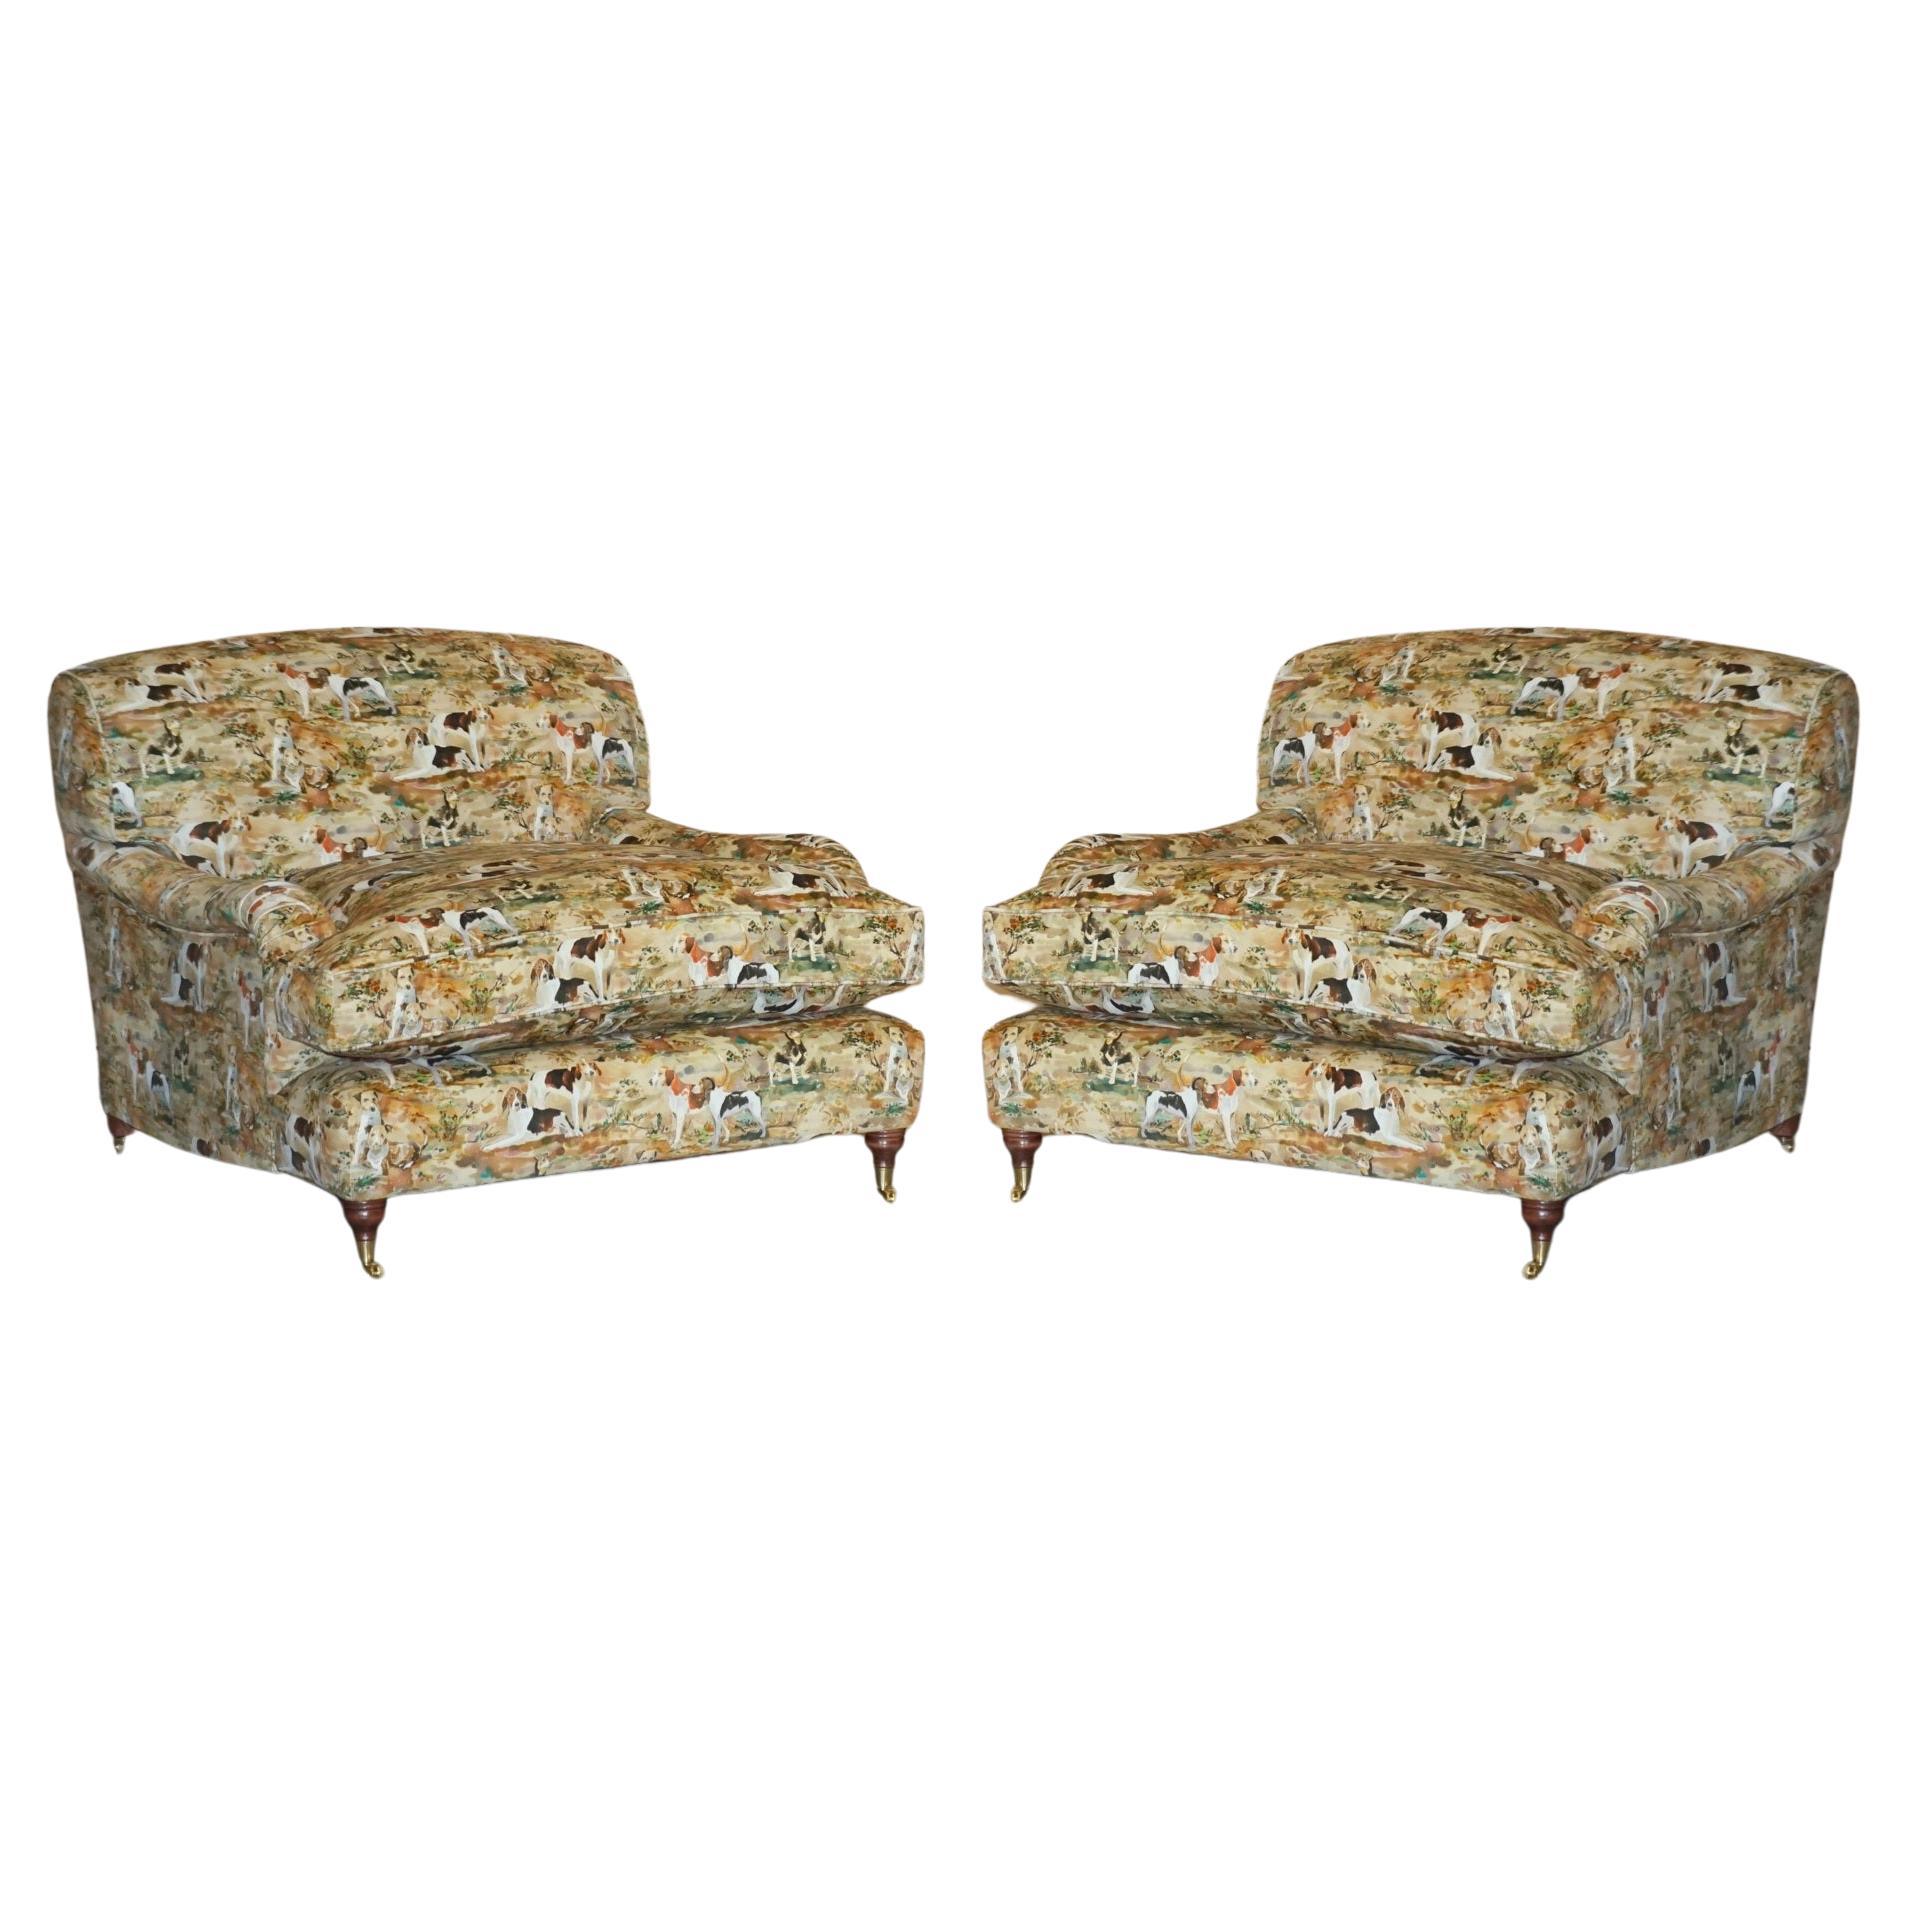 New Pair of Mulberry Custom Made Howard Love Seat Armchairs Hounds Silk Velvet For Sale